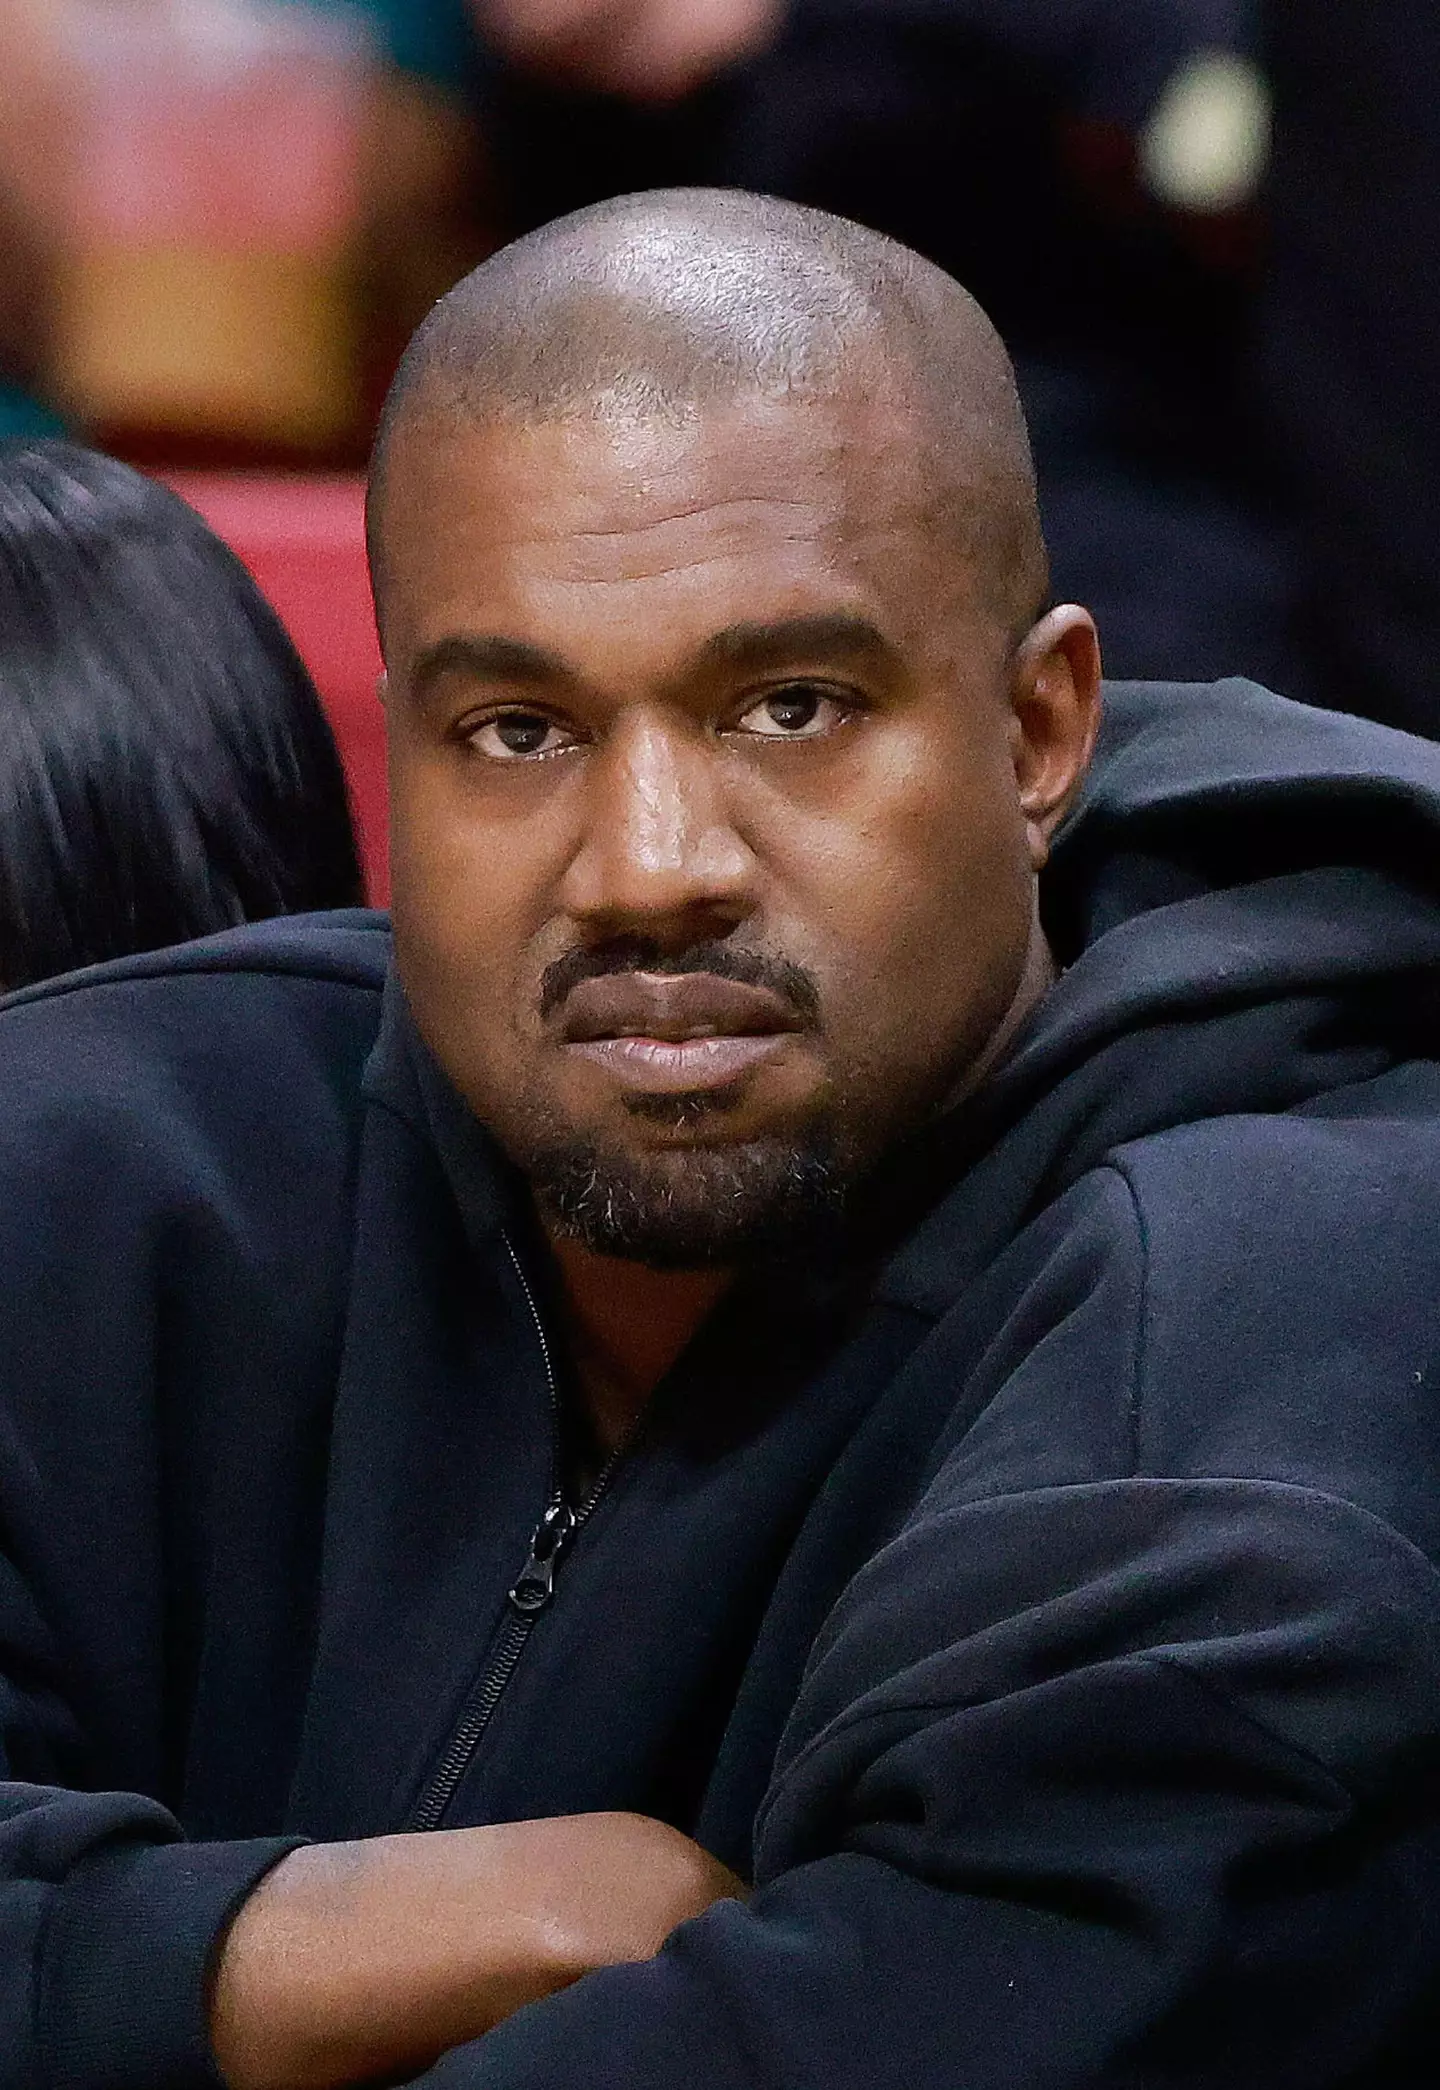 Kanye West was dropped by sponsors following his offensive comments.